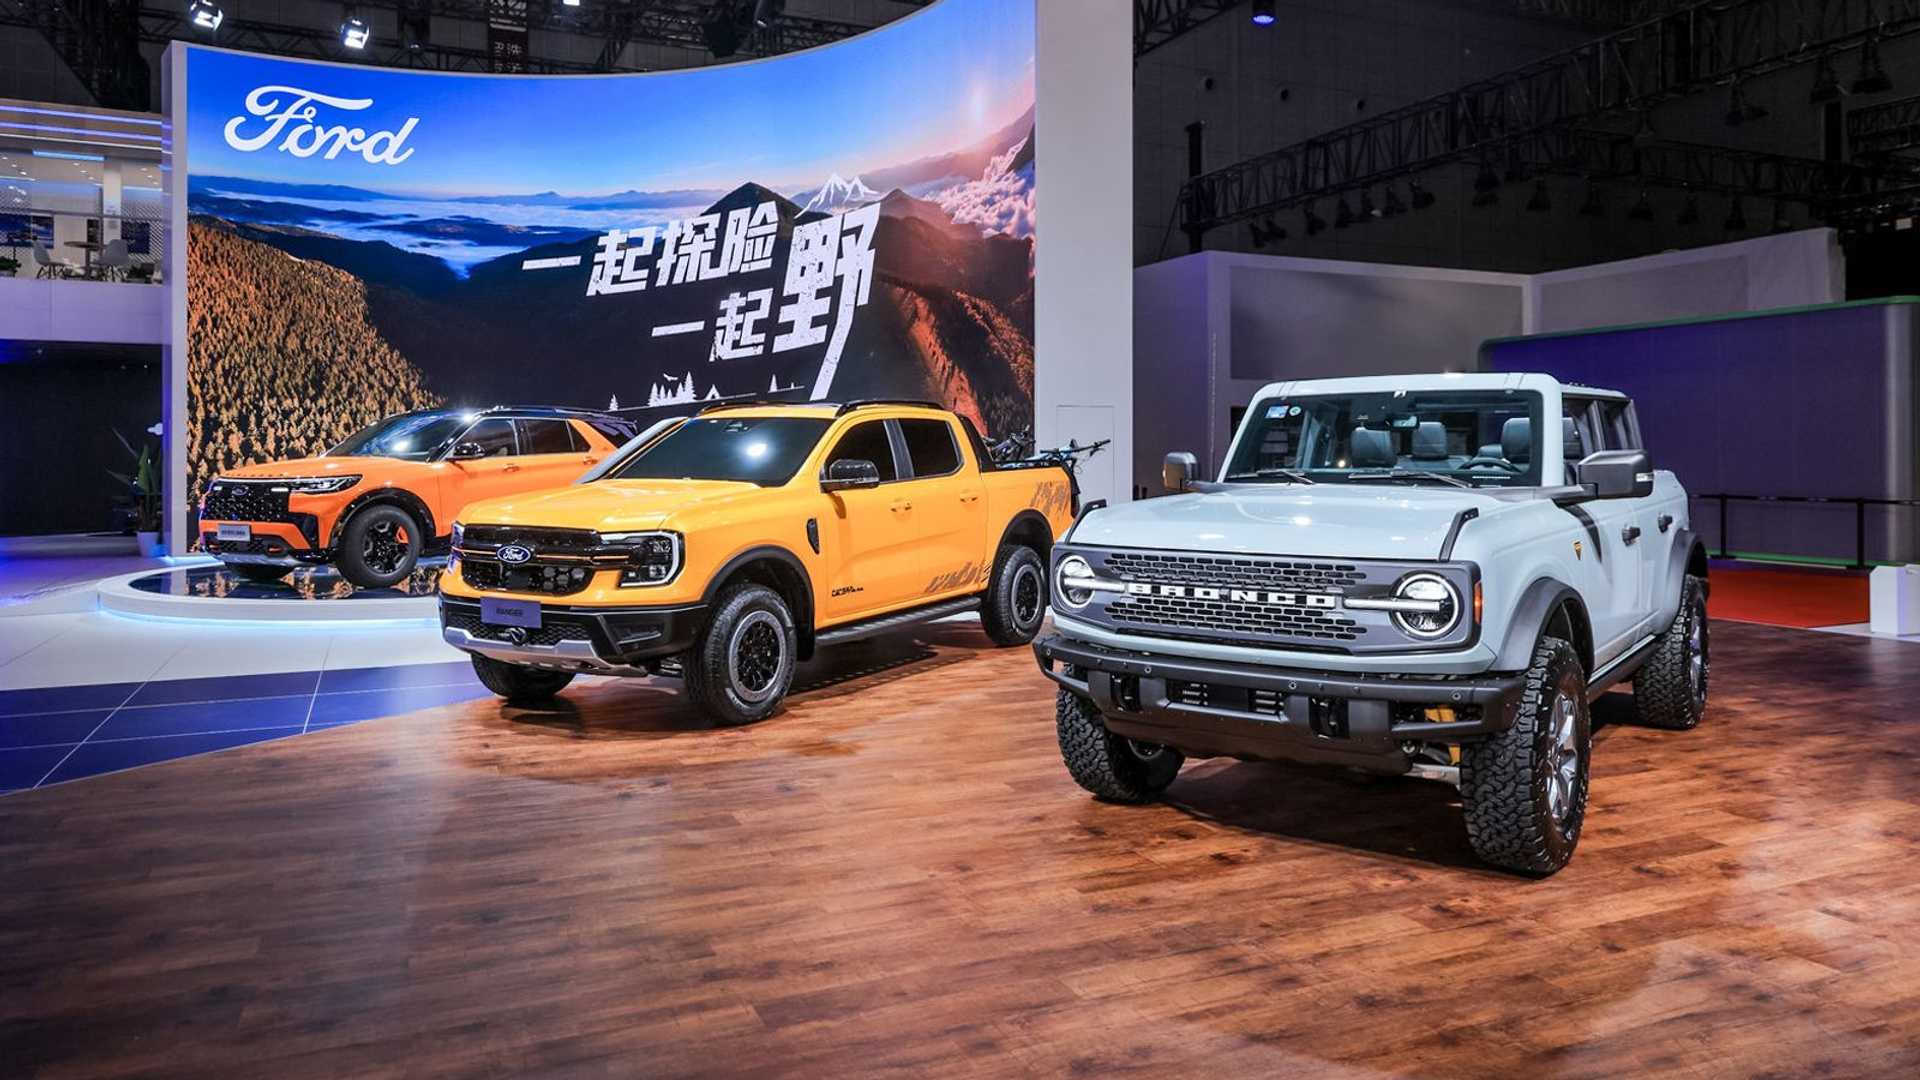 Ford Ranger Just returned from Fiji...6G Ranger already on the road (saw the new Raptor as well). ford-ranger-china-spec